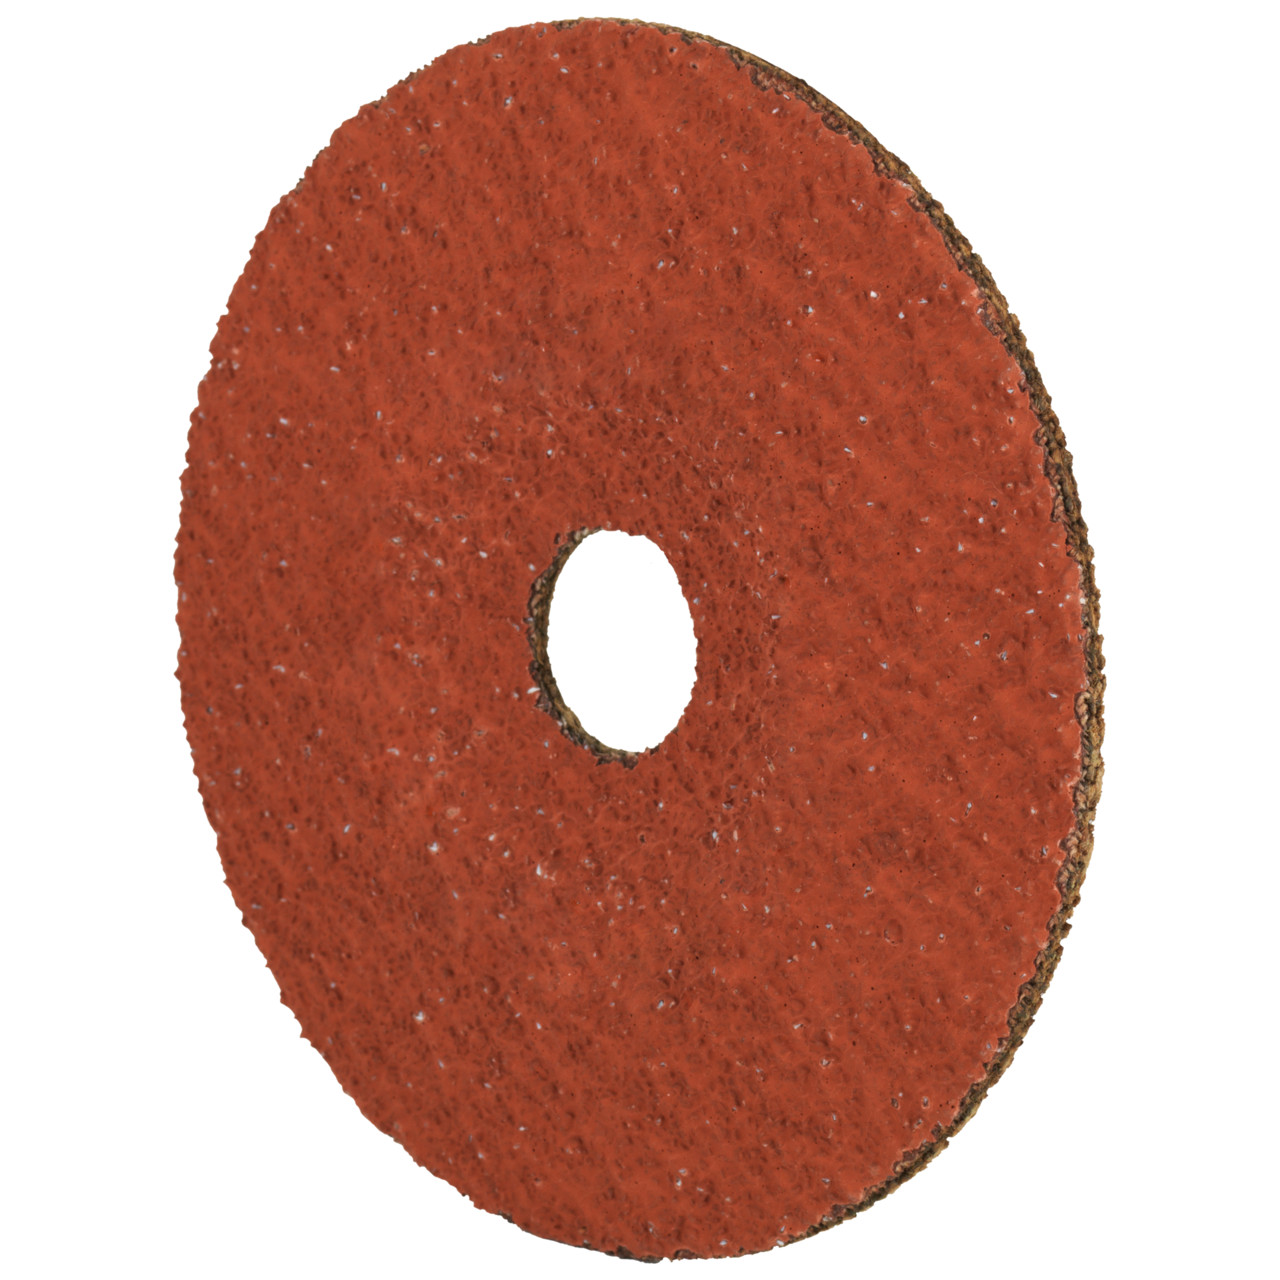 Tyrolit CA-PA93 N NATURAL FIBRE DISC DxH 125x22 For steel and stainless steel, P36, form: DISC, Art. 712268